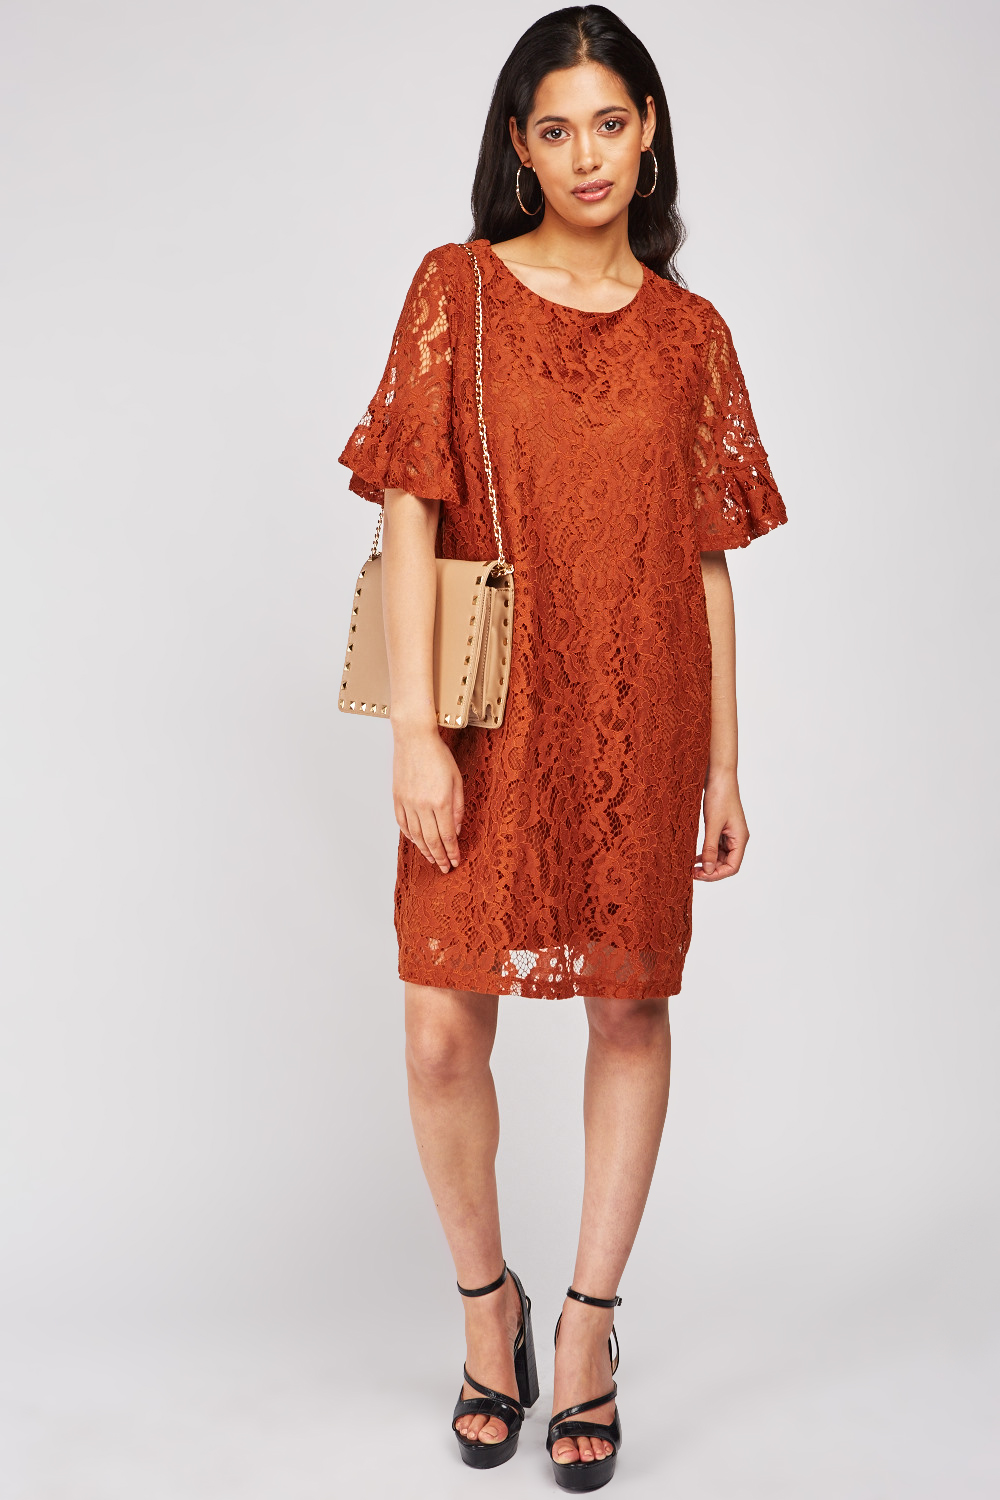 Frilly Sleeve Brown Lace Dress - Just $7